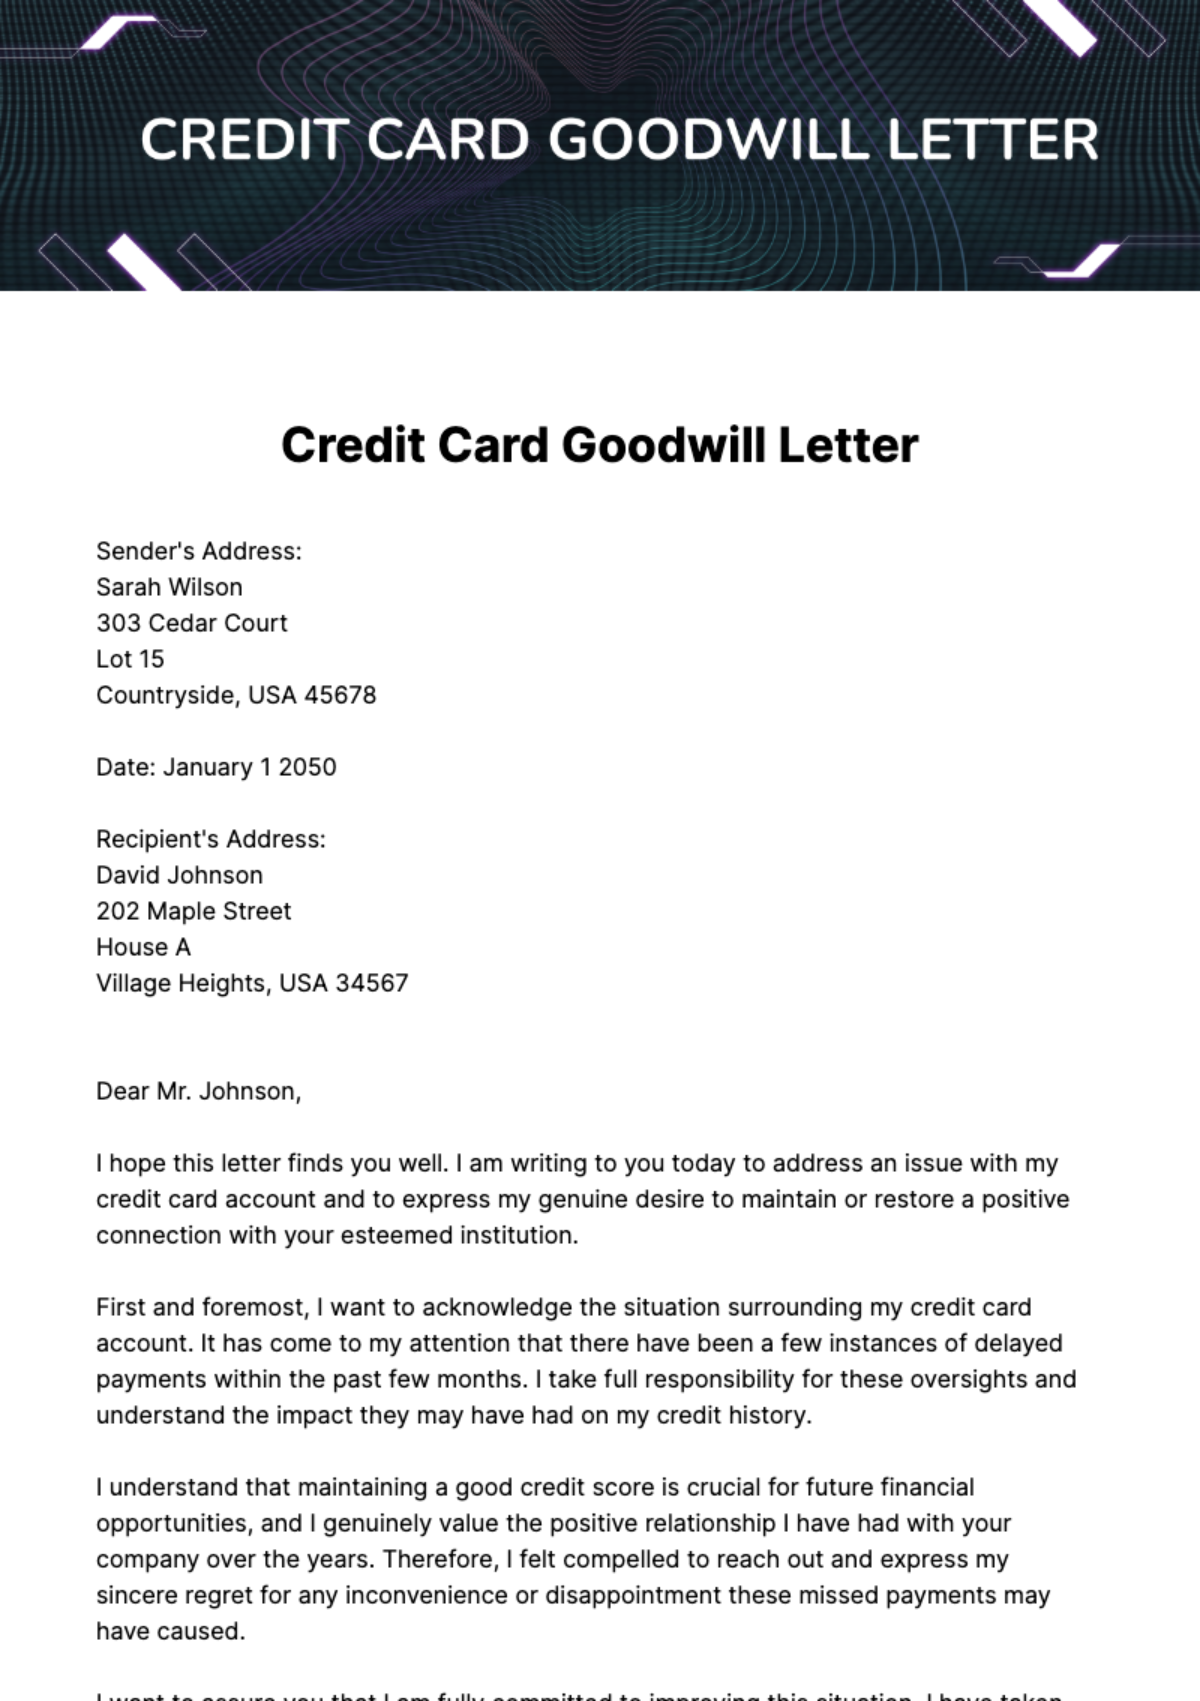 Credit Card Goodwill Letter Template